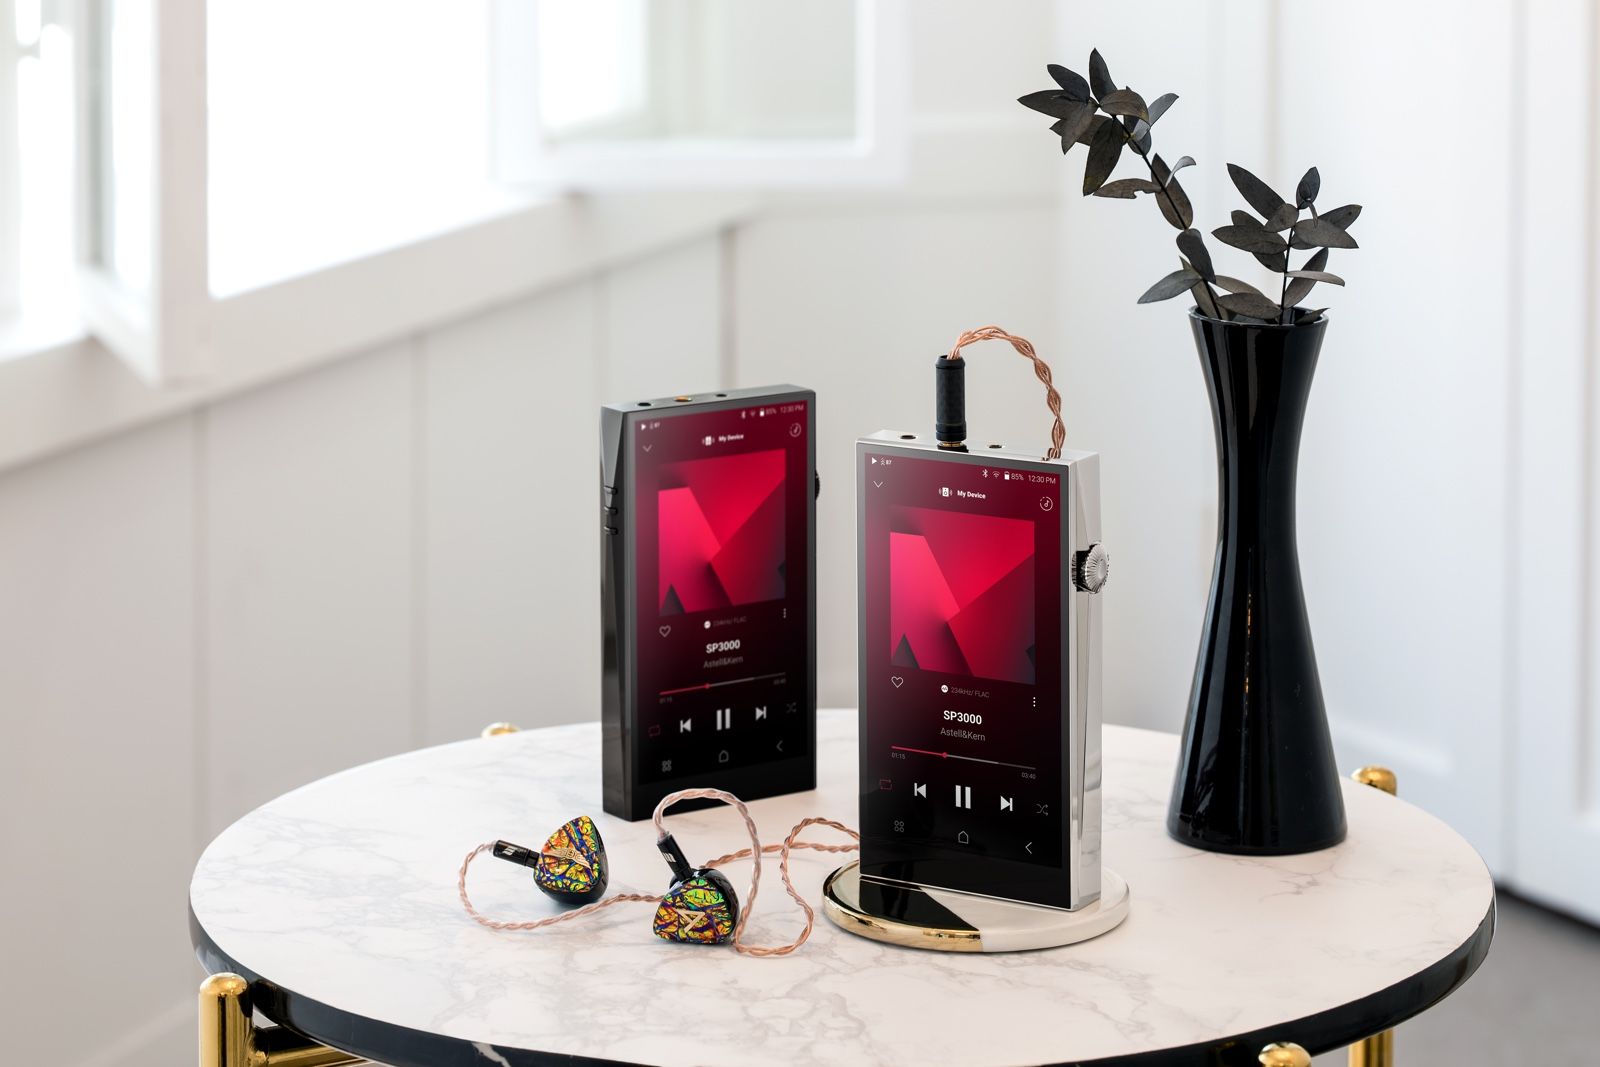 Astell & Kern A&ultima SP3000 photo 2